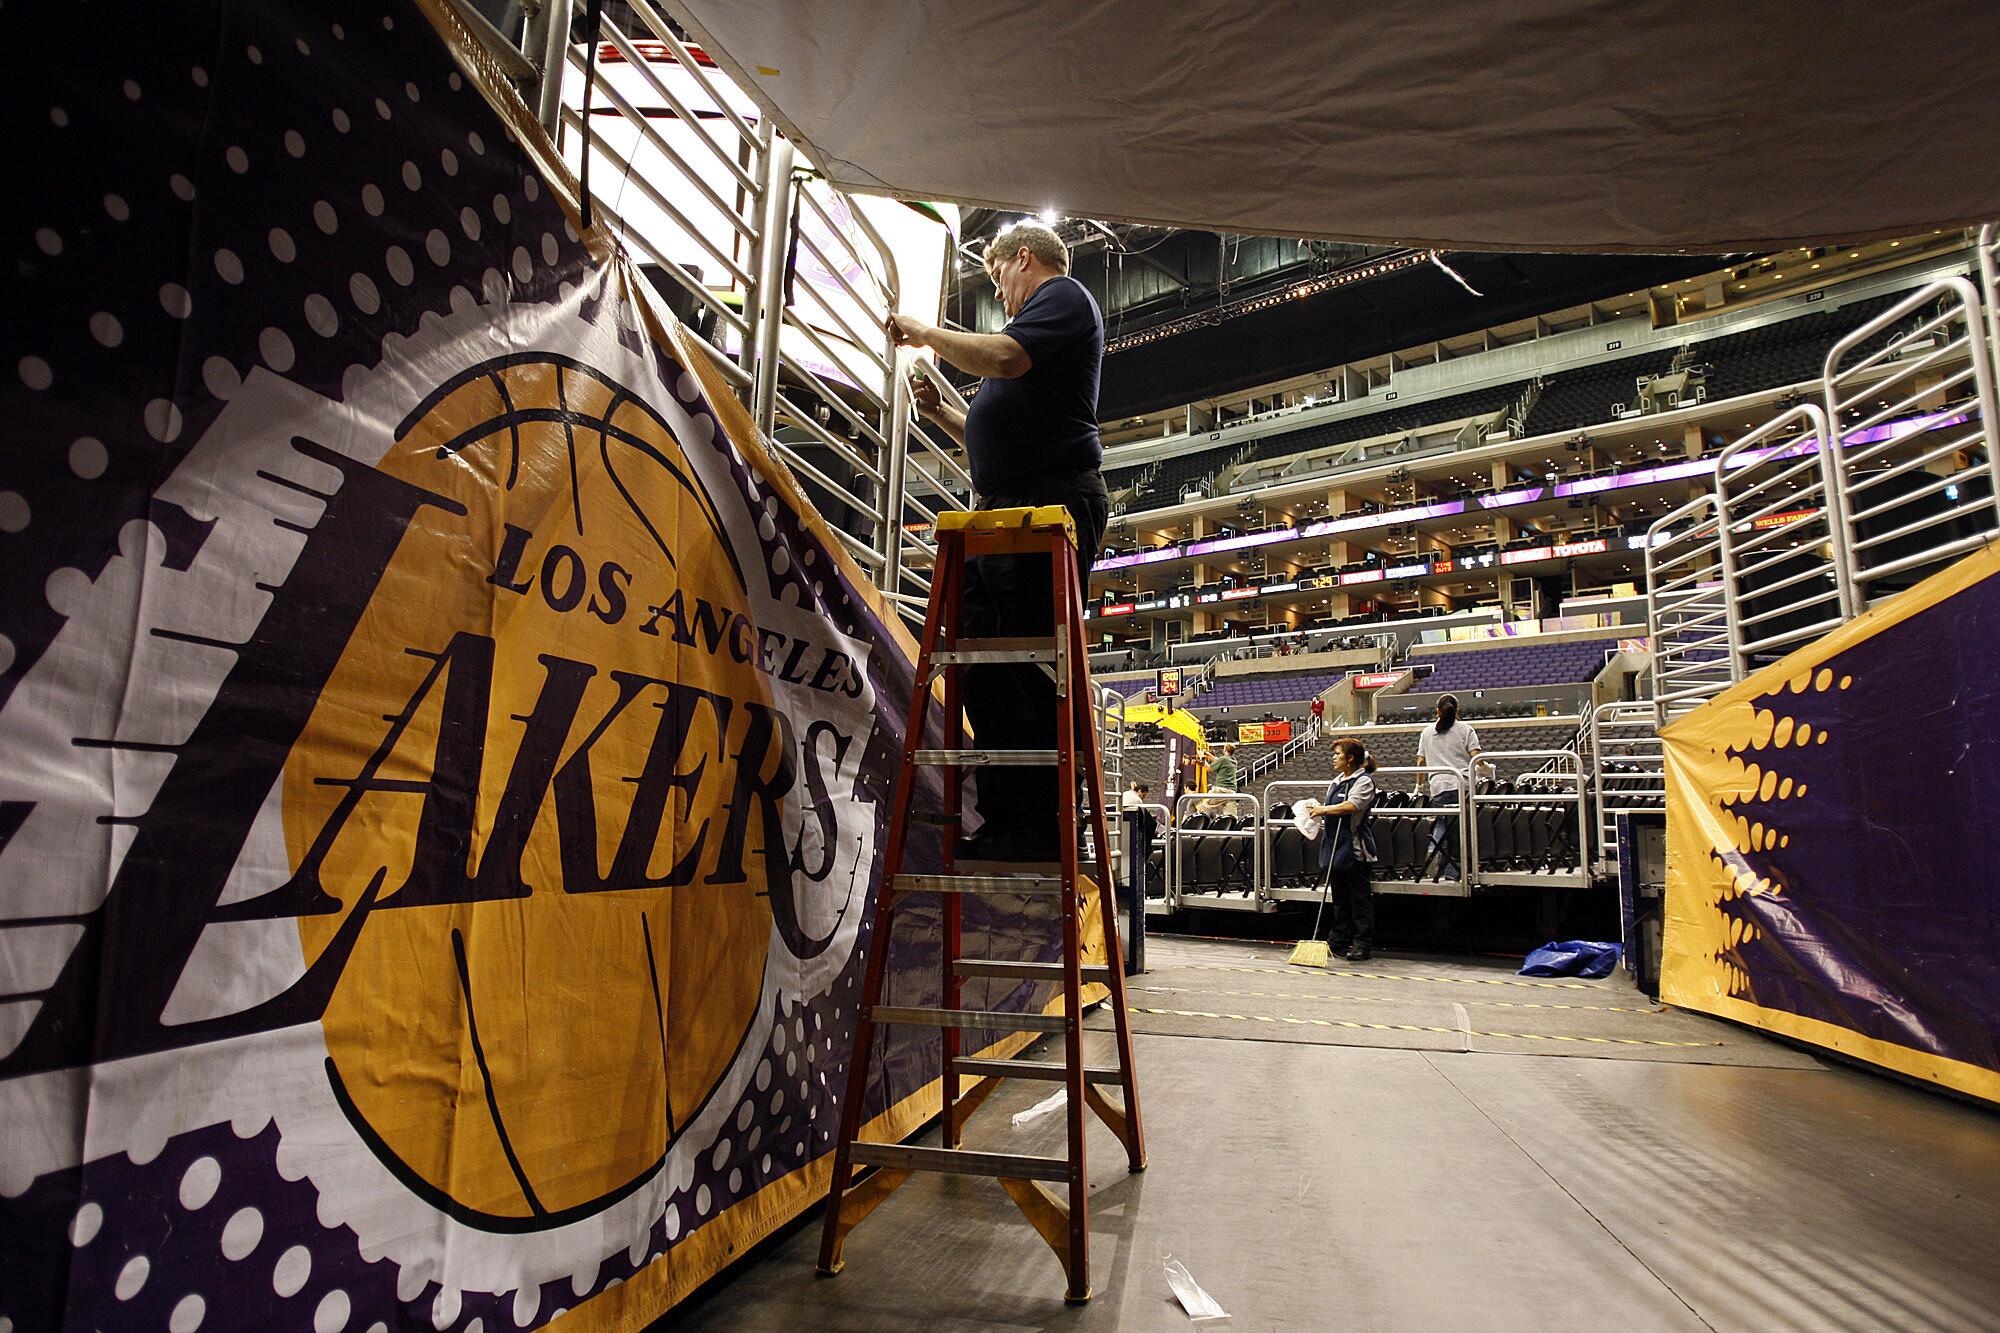 An arena worker puts up a Lakers banner in a tunnel as its converted from a Clippers game played earlier in the day.